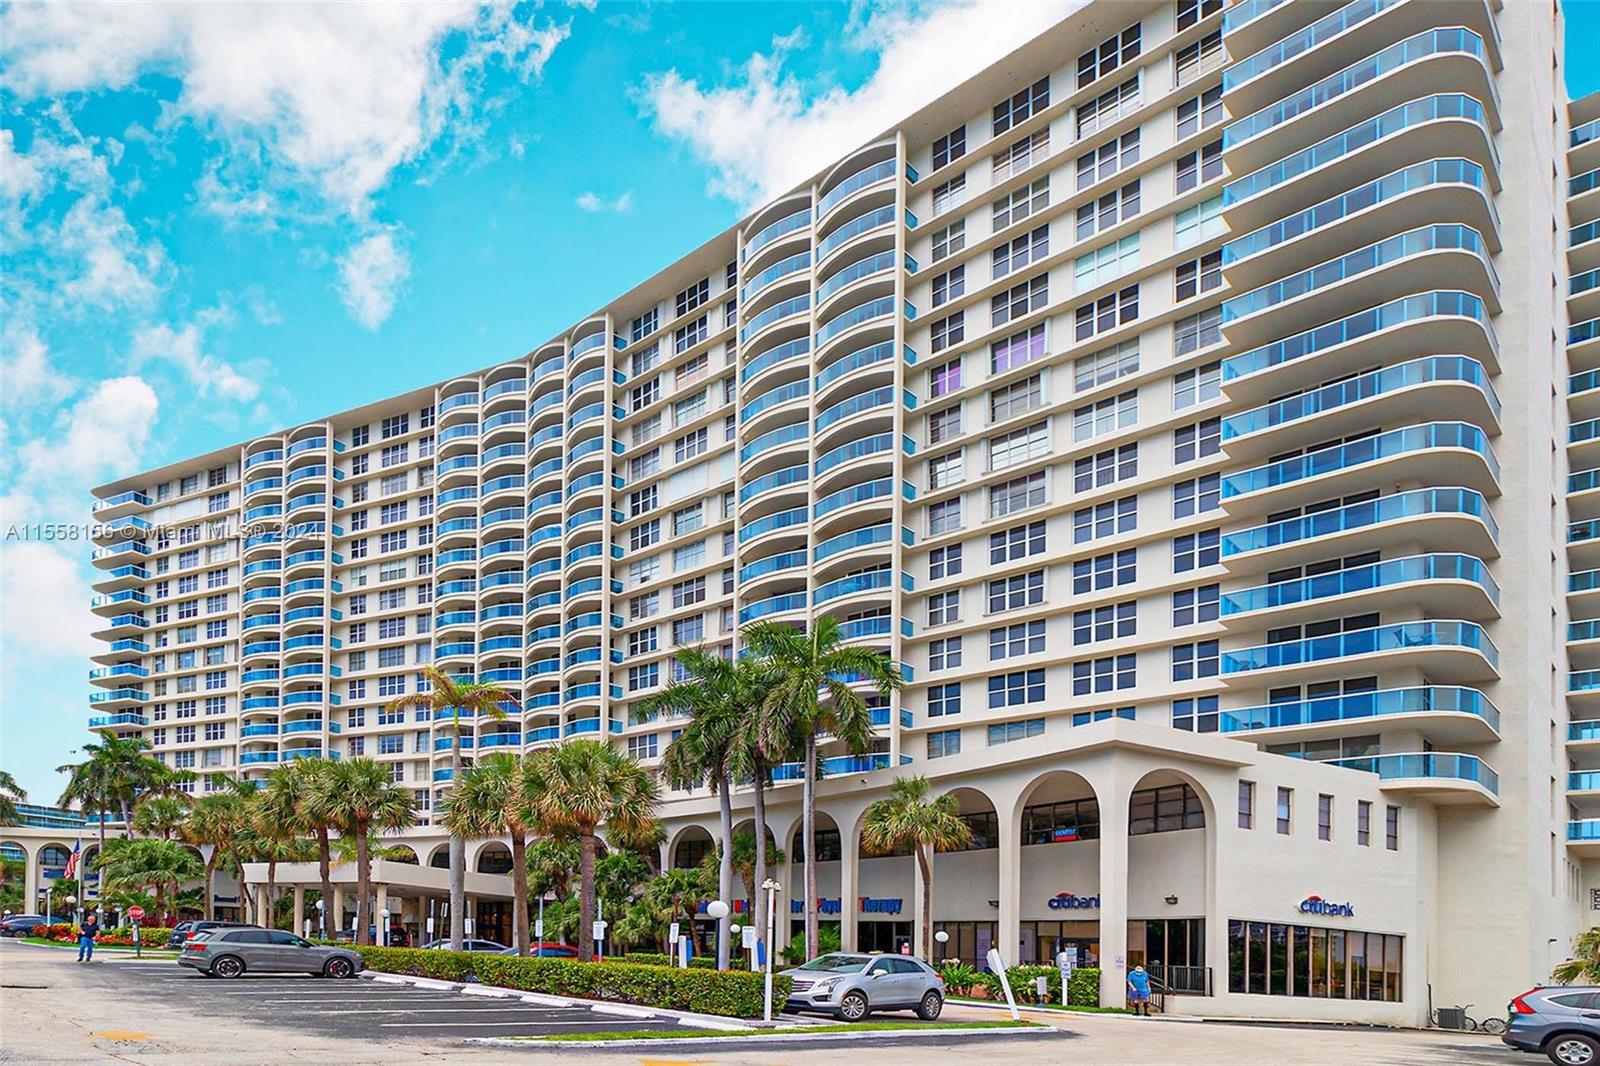 Photo of 3800 S Ocean Dr #803 in Hollywood, FL